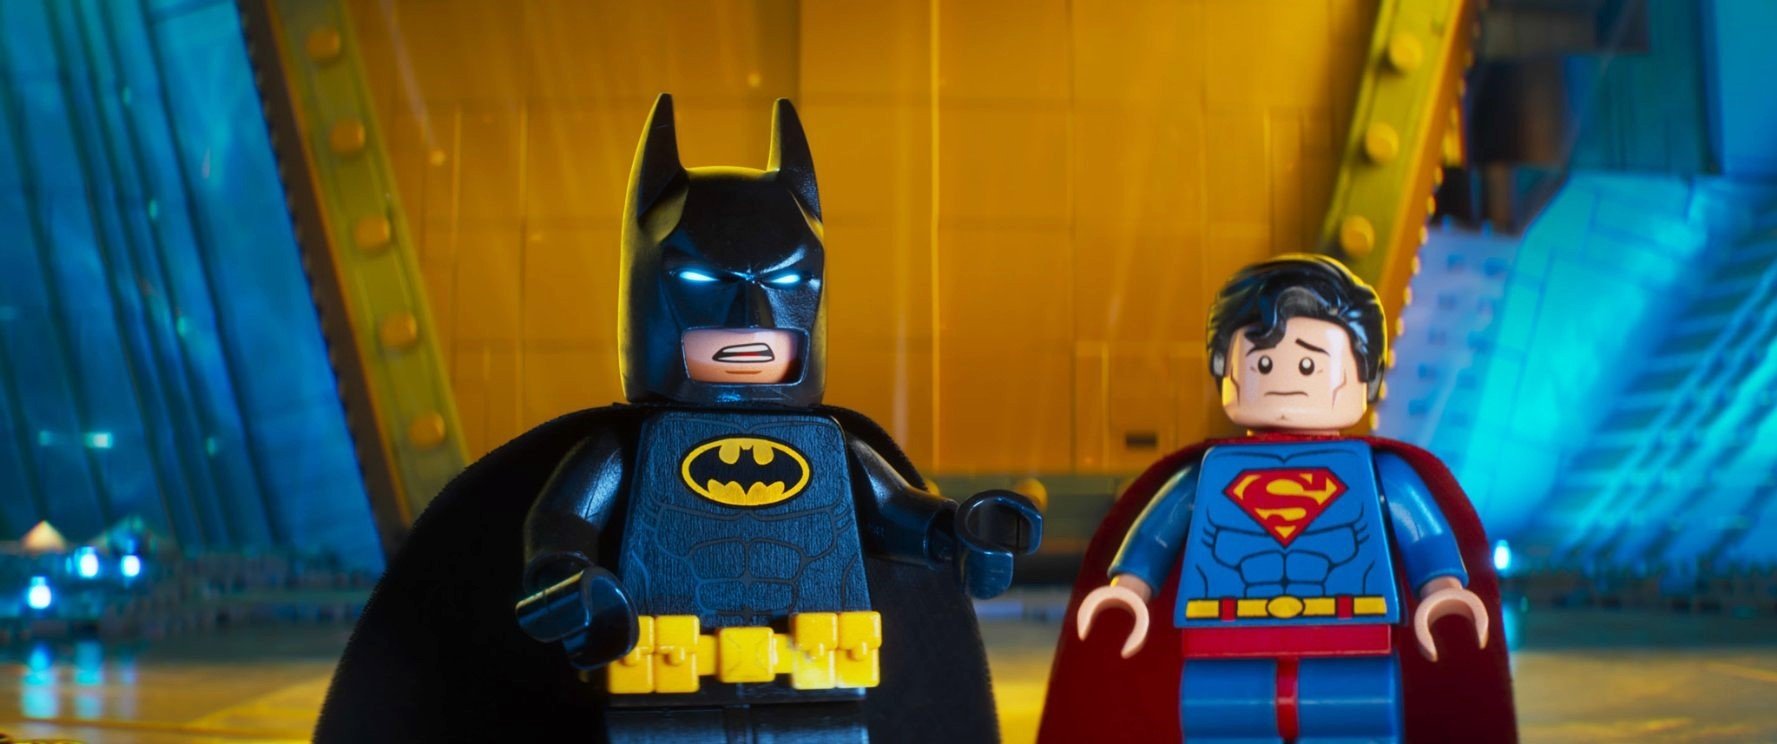 Batman/Bruce Wayne and Superman from Warner Bros. Pictures' The Lego Batman Movie (2017)